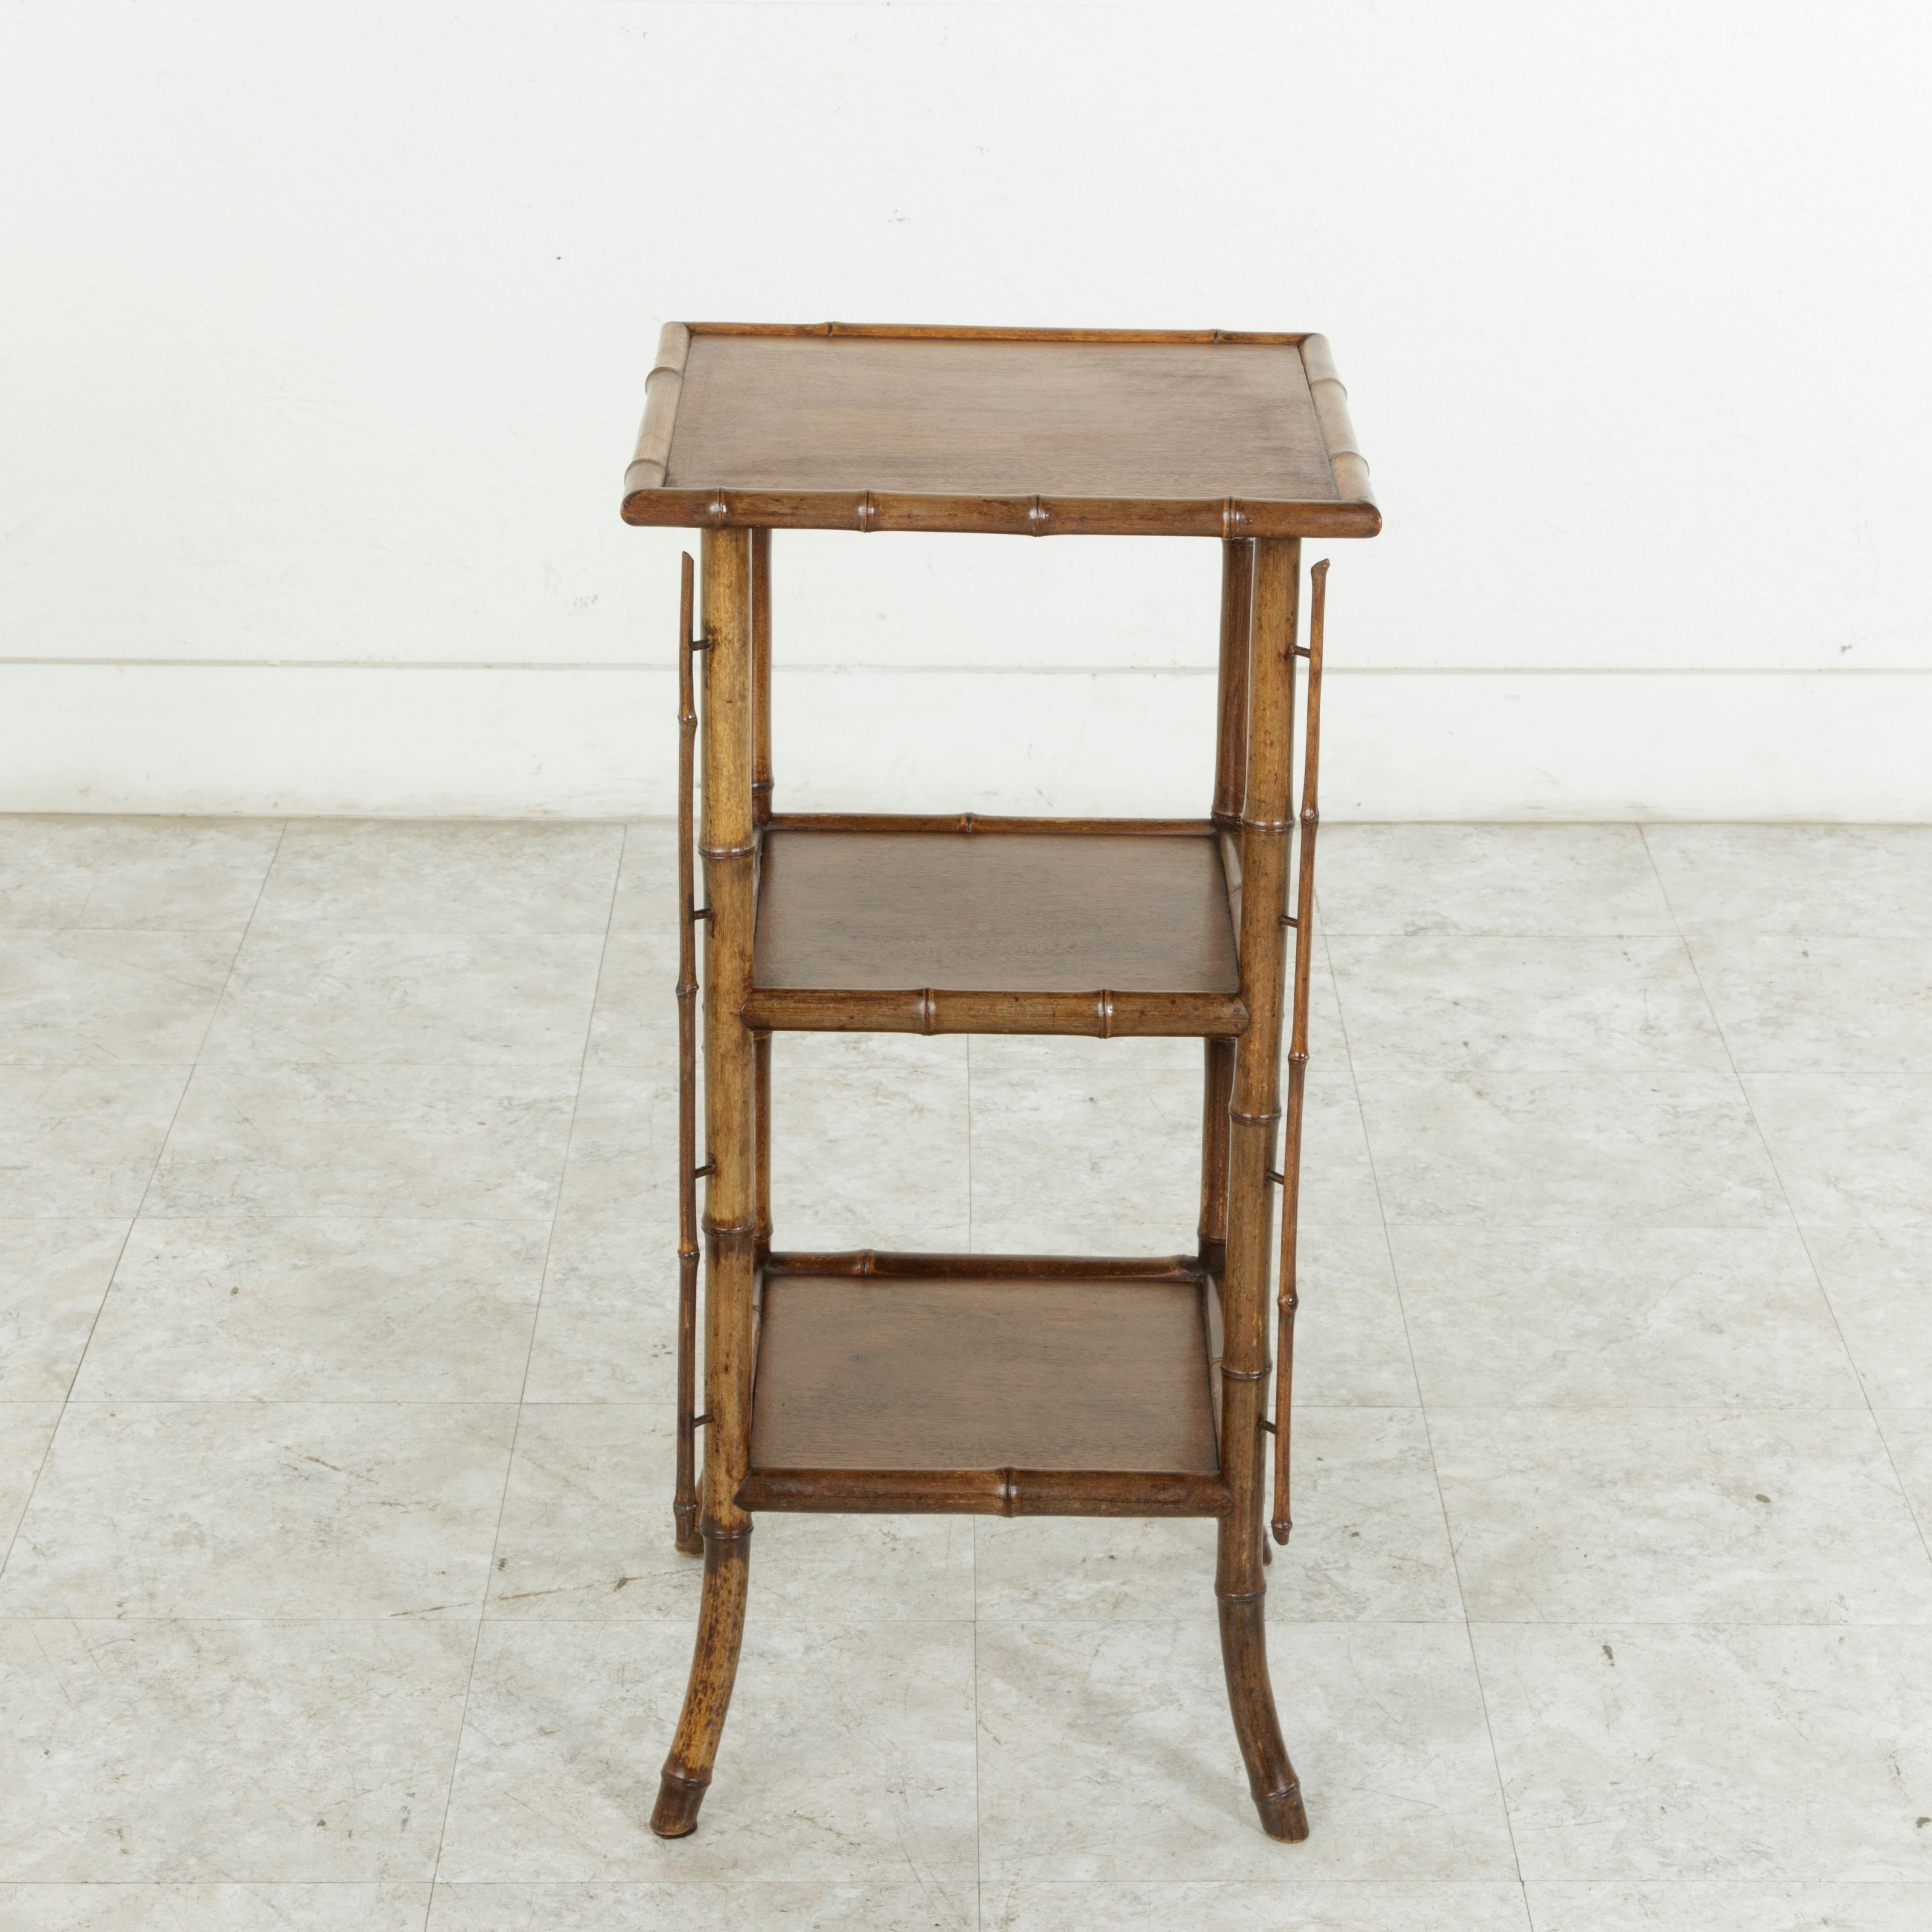 This French fern stand from the turn of the twentieth century features a construction of bamboo with three mahogany shelves. The four legs gently flair out at the bottom, and bamboo shoots are offset from the legs giving the piece a contemporary